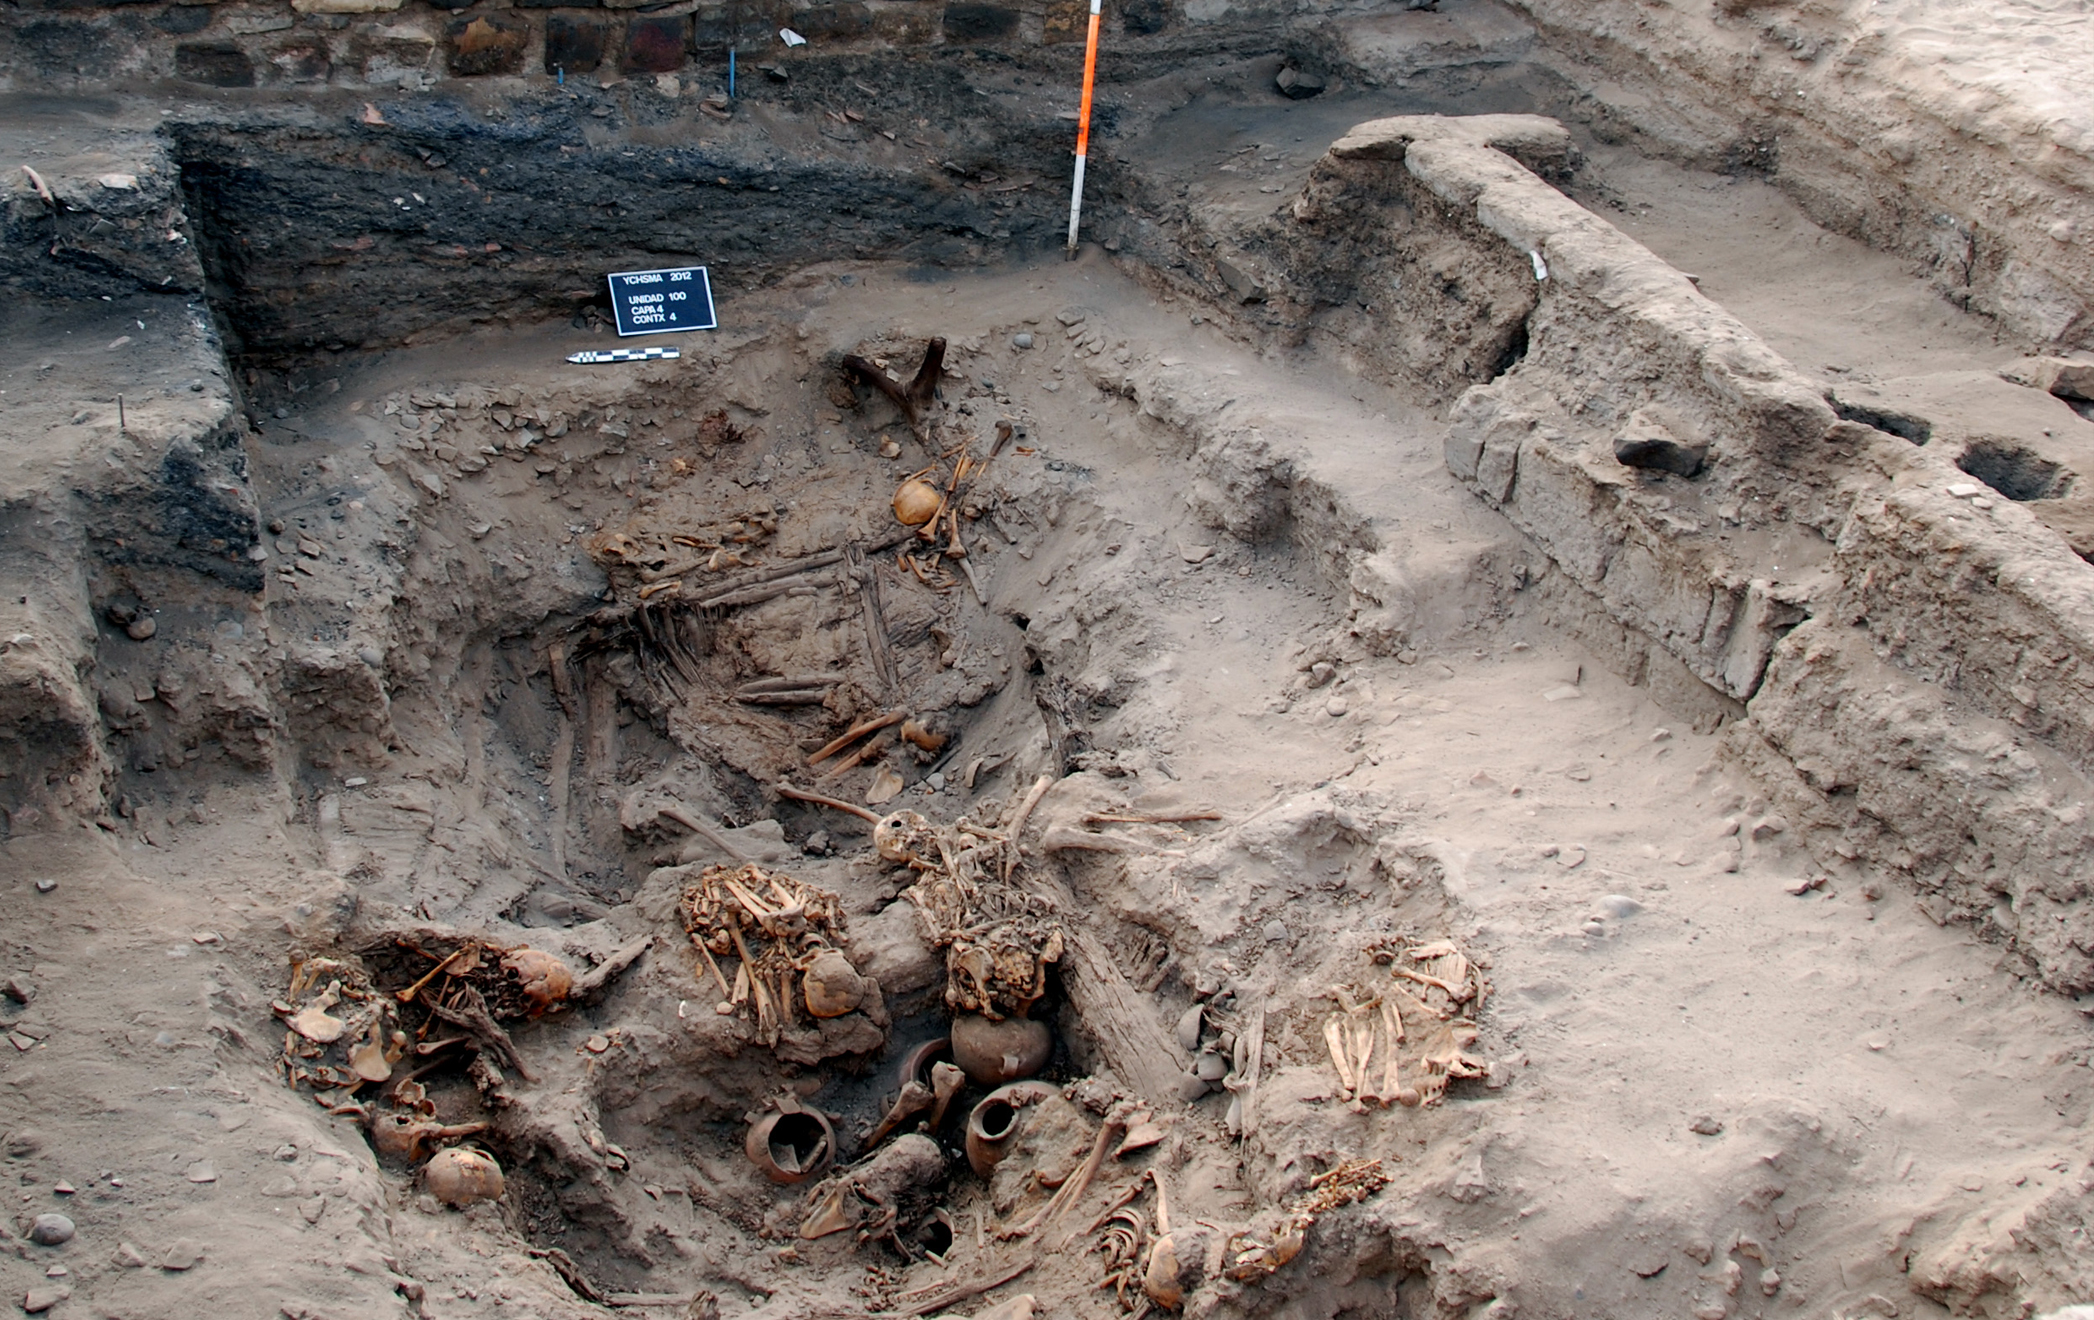 1000-year-old pre-Inca tomb found intact in Peru – The History Blog